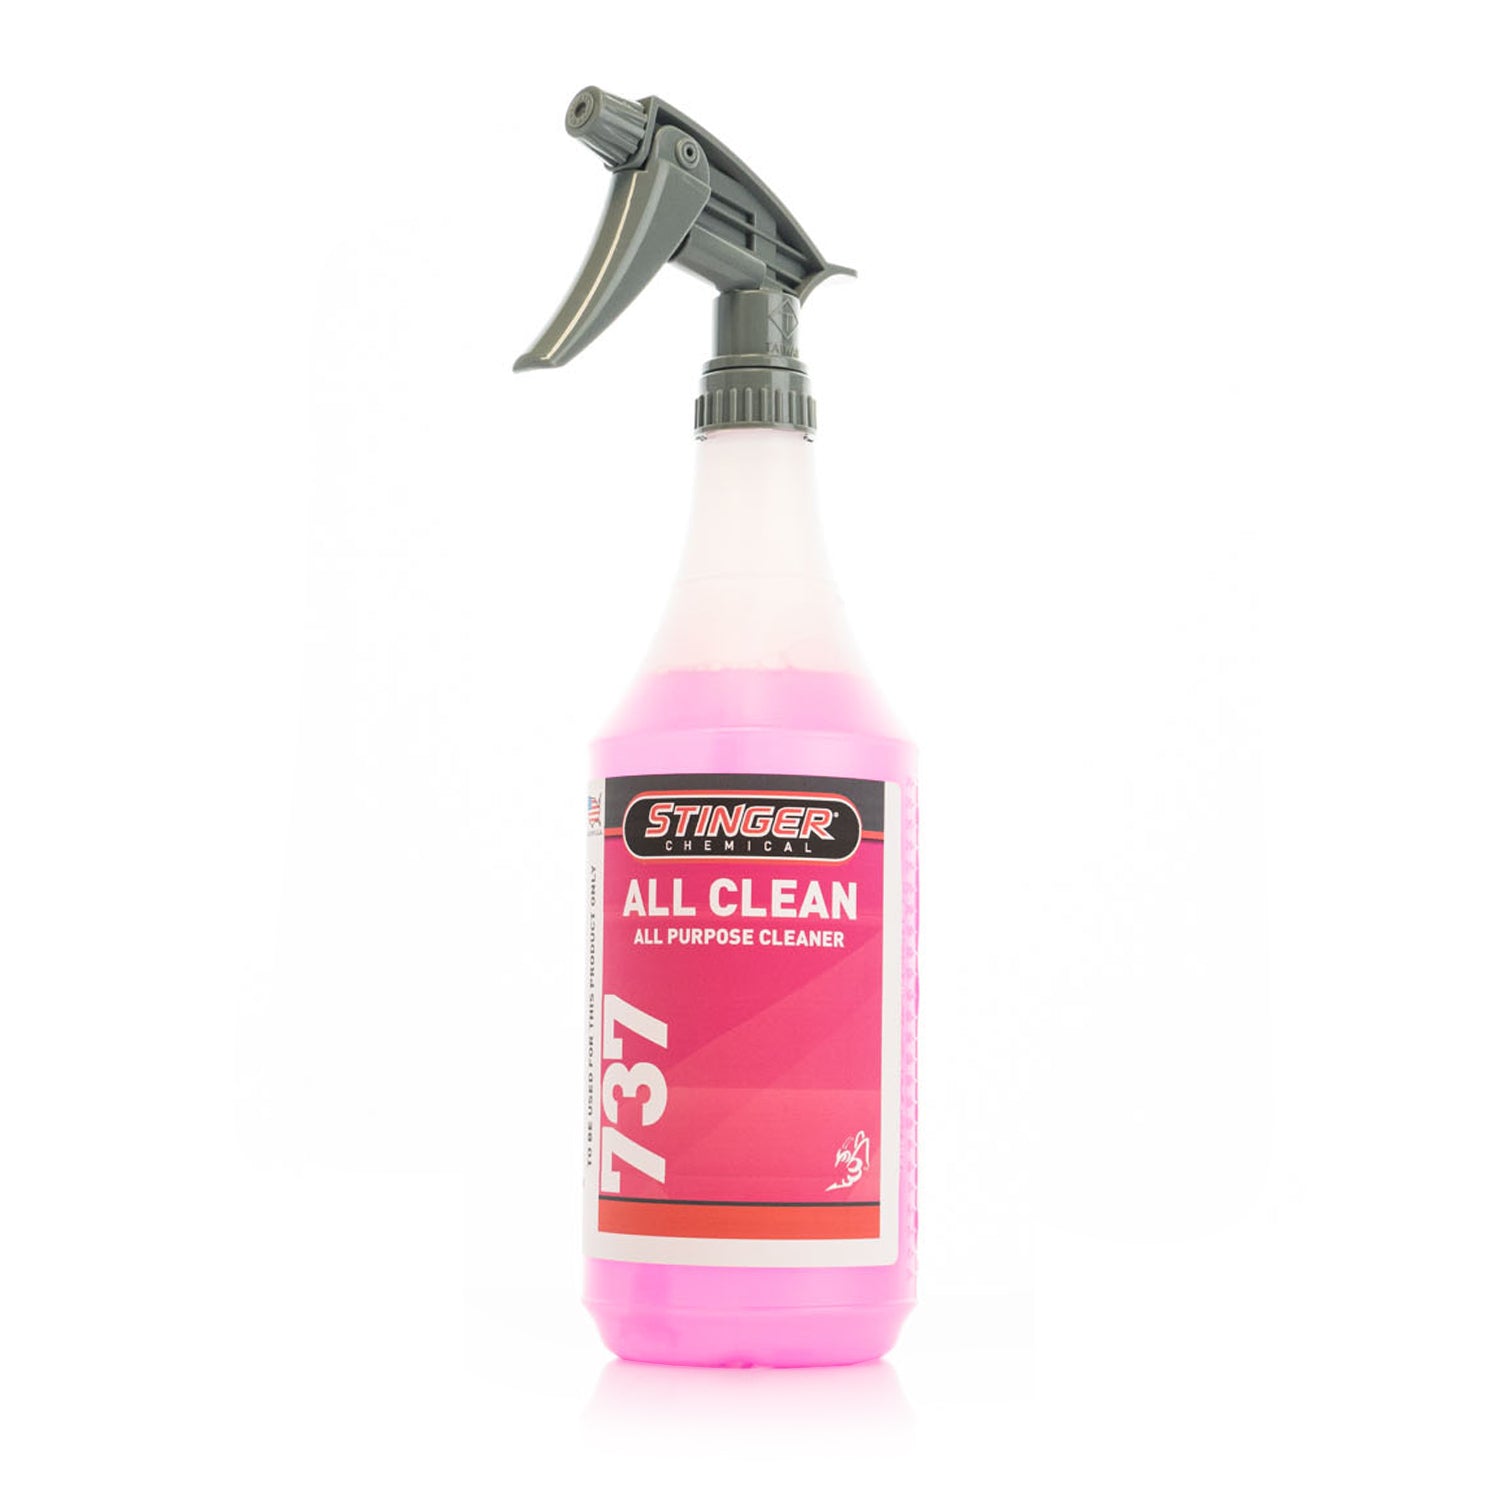 All Purpose Cleaner Degreaser and Auto Detailing supplies